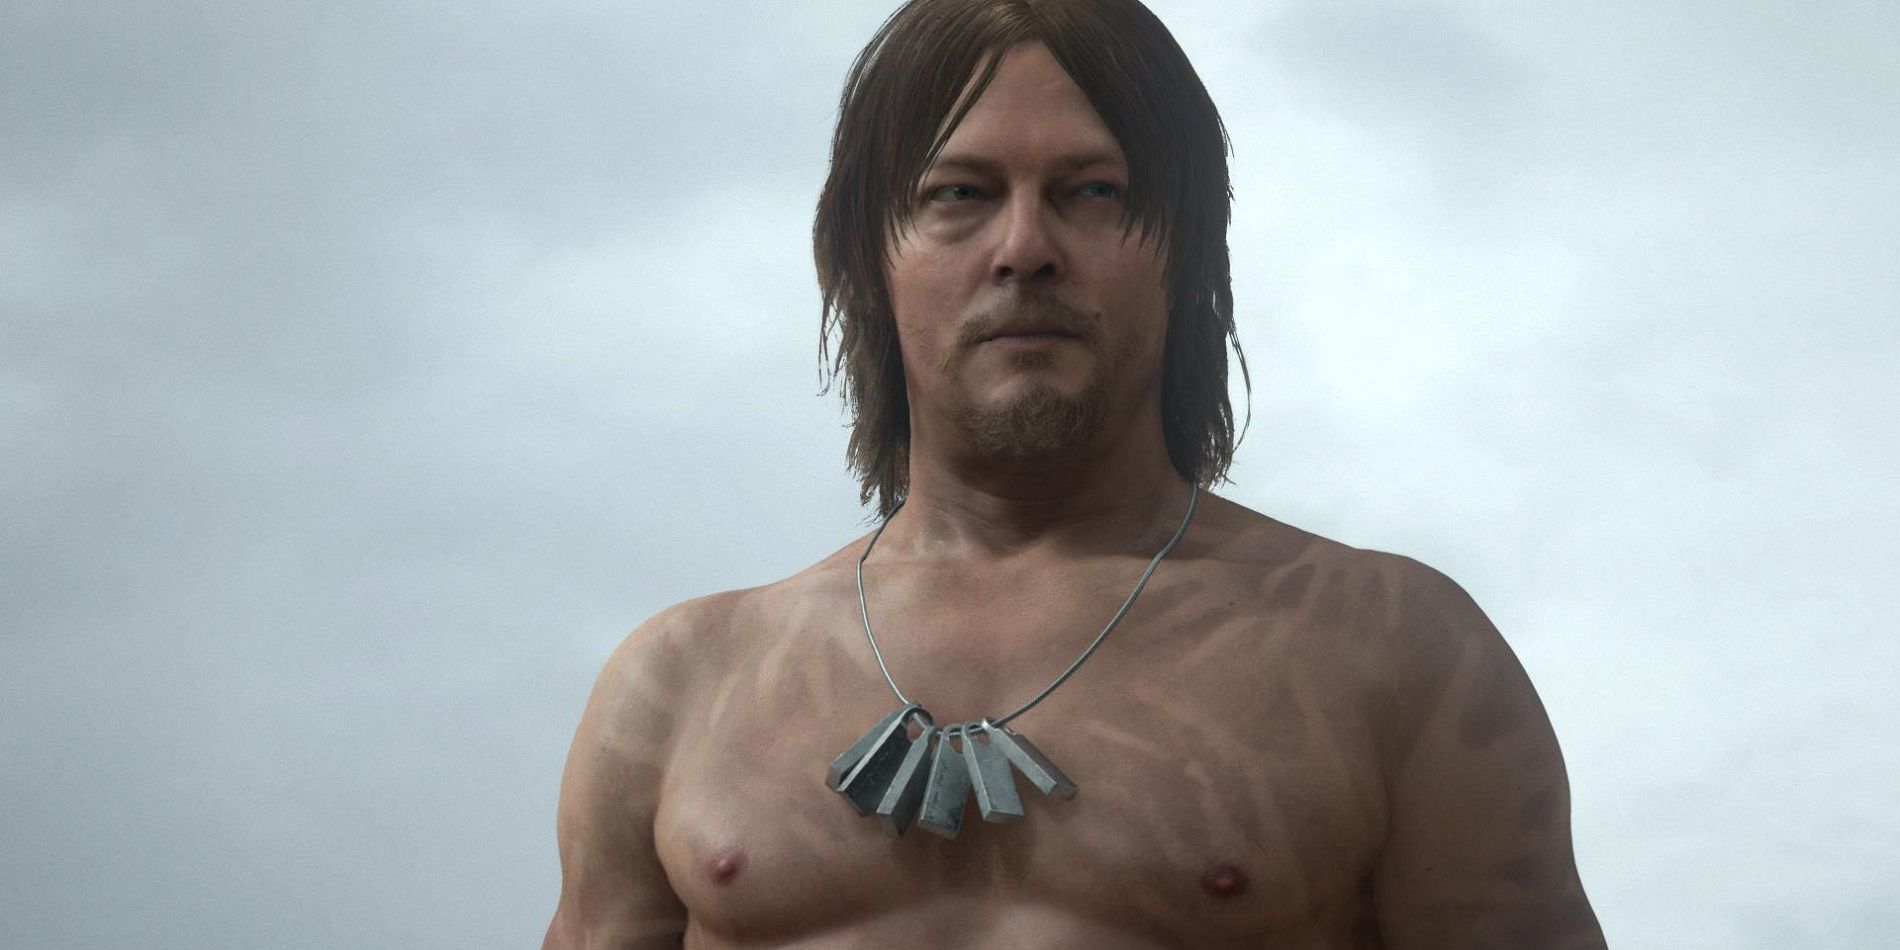 Norman Reedus as the main character in Death Stranding